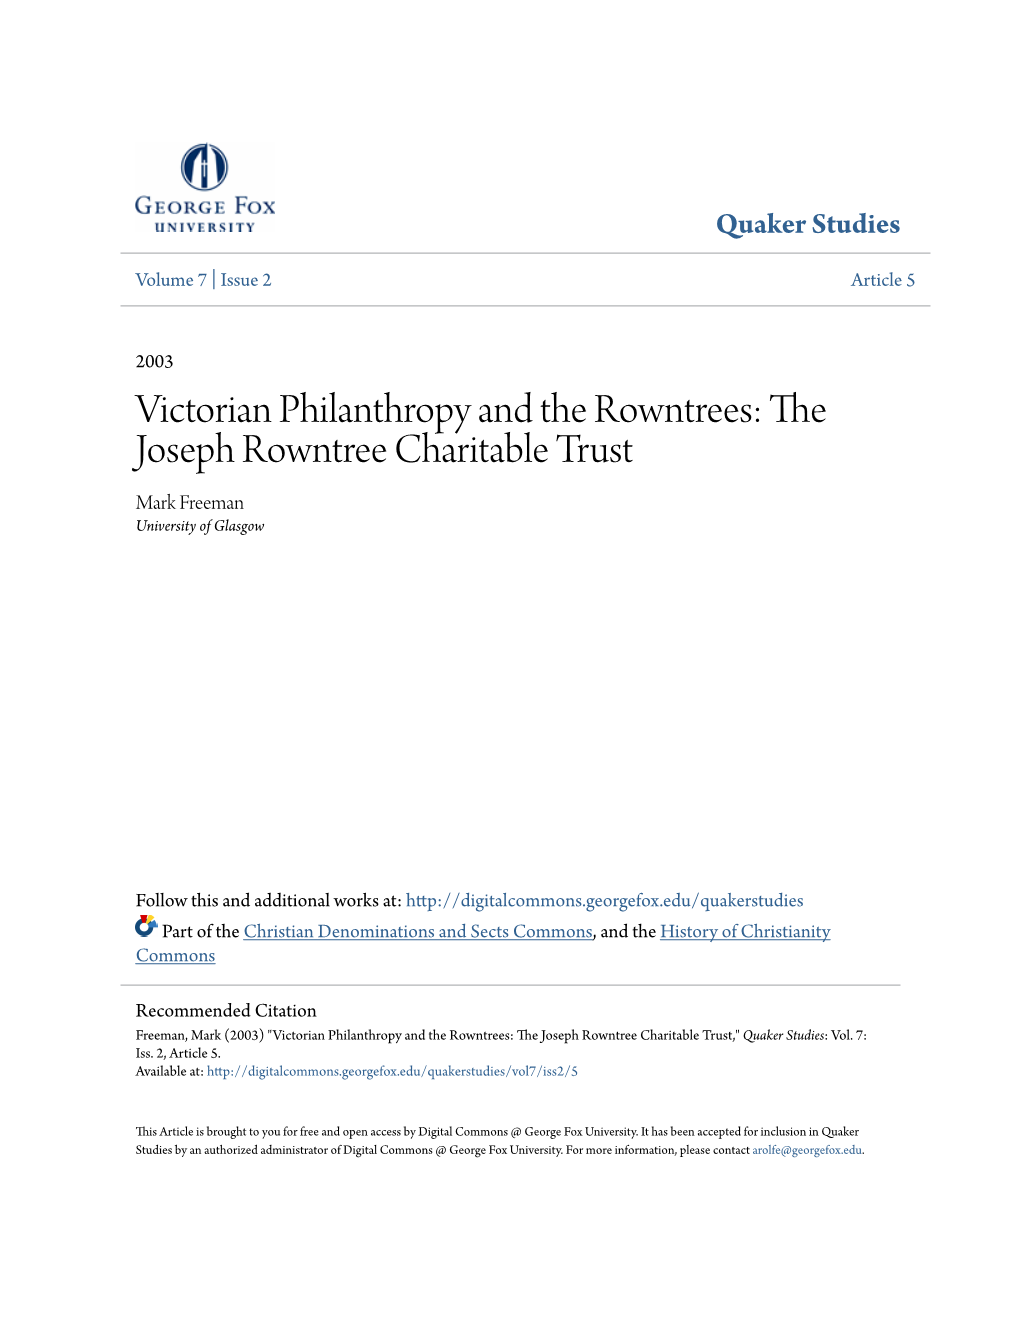 Victorian Philanthropy and the Rowntrees: the Joseph Rowntree Charitable Trust Mark Freeman University of Glasgow